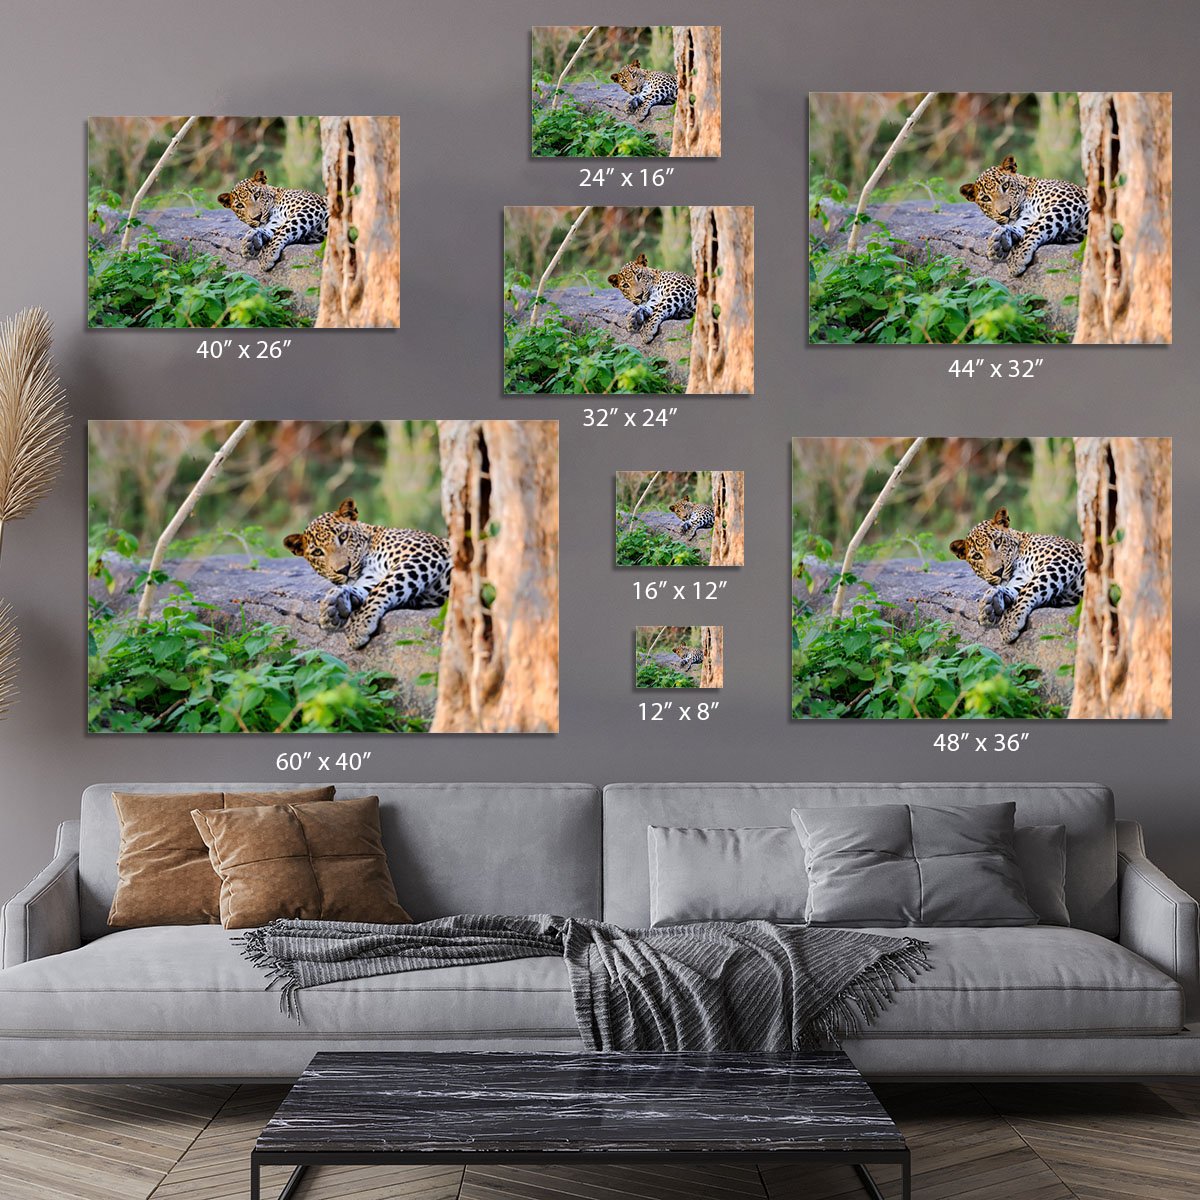 Leopard in the wild Canvas Print or Poster